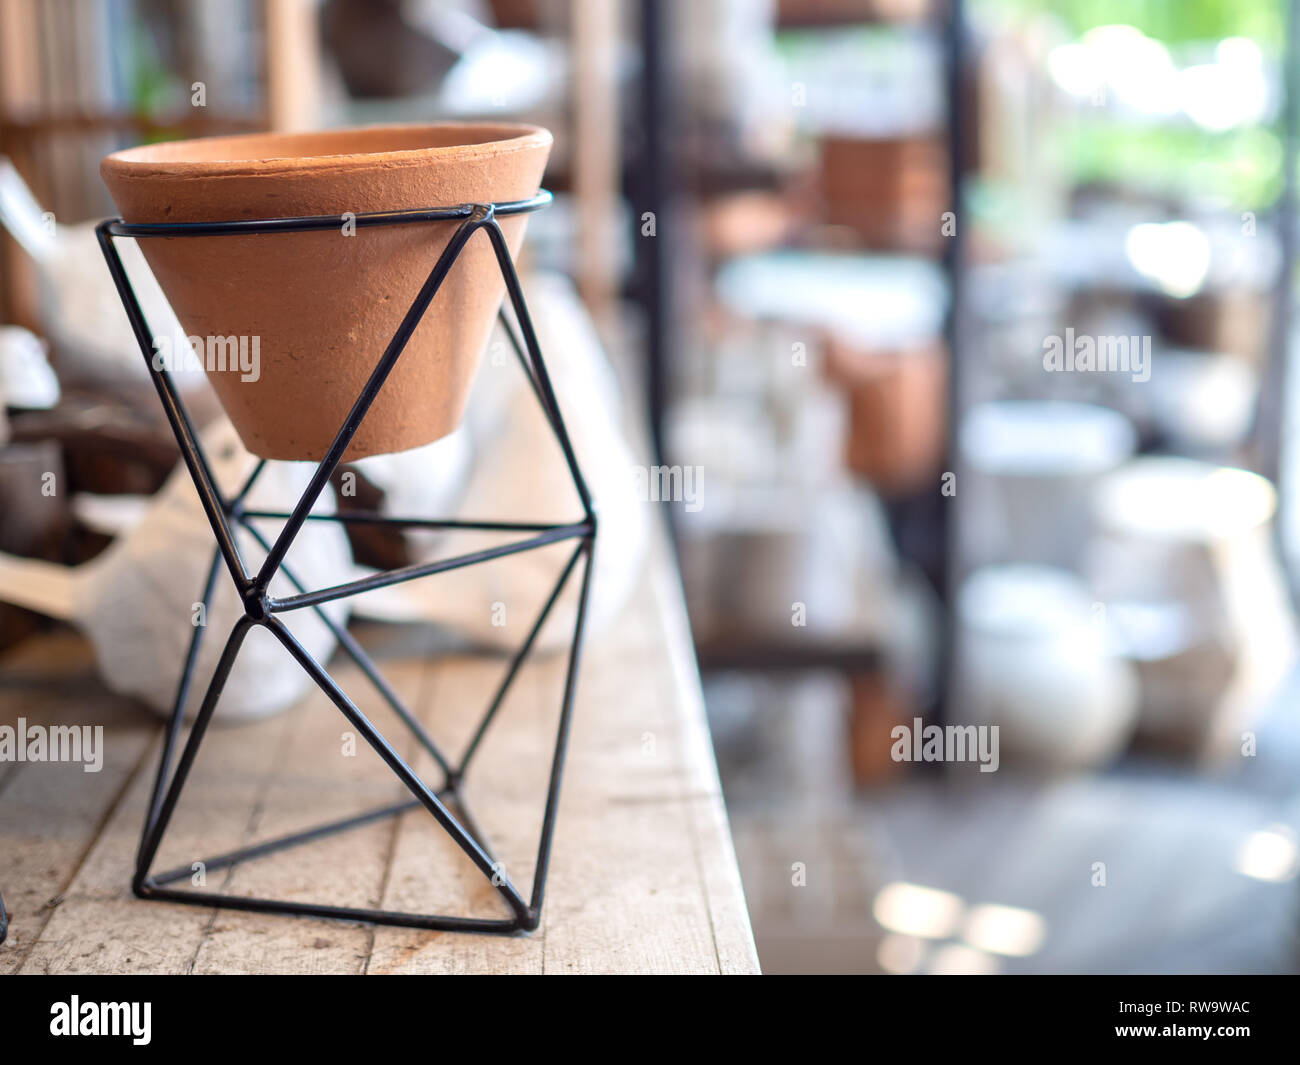 Empty small terracotta pot in modern black geometric Iron rack holder on wooden table with copy space. Stock Photo